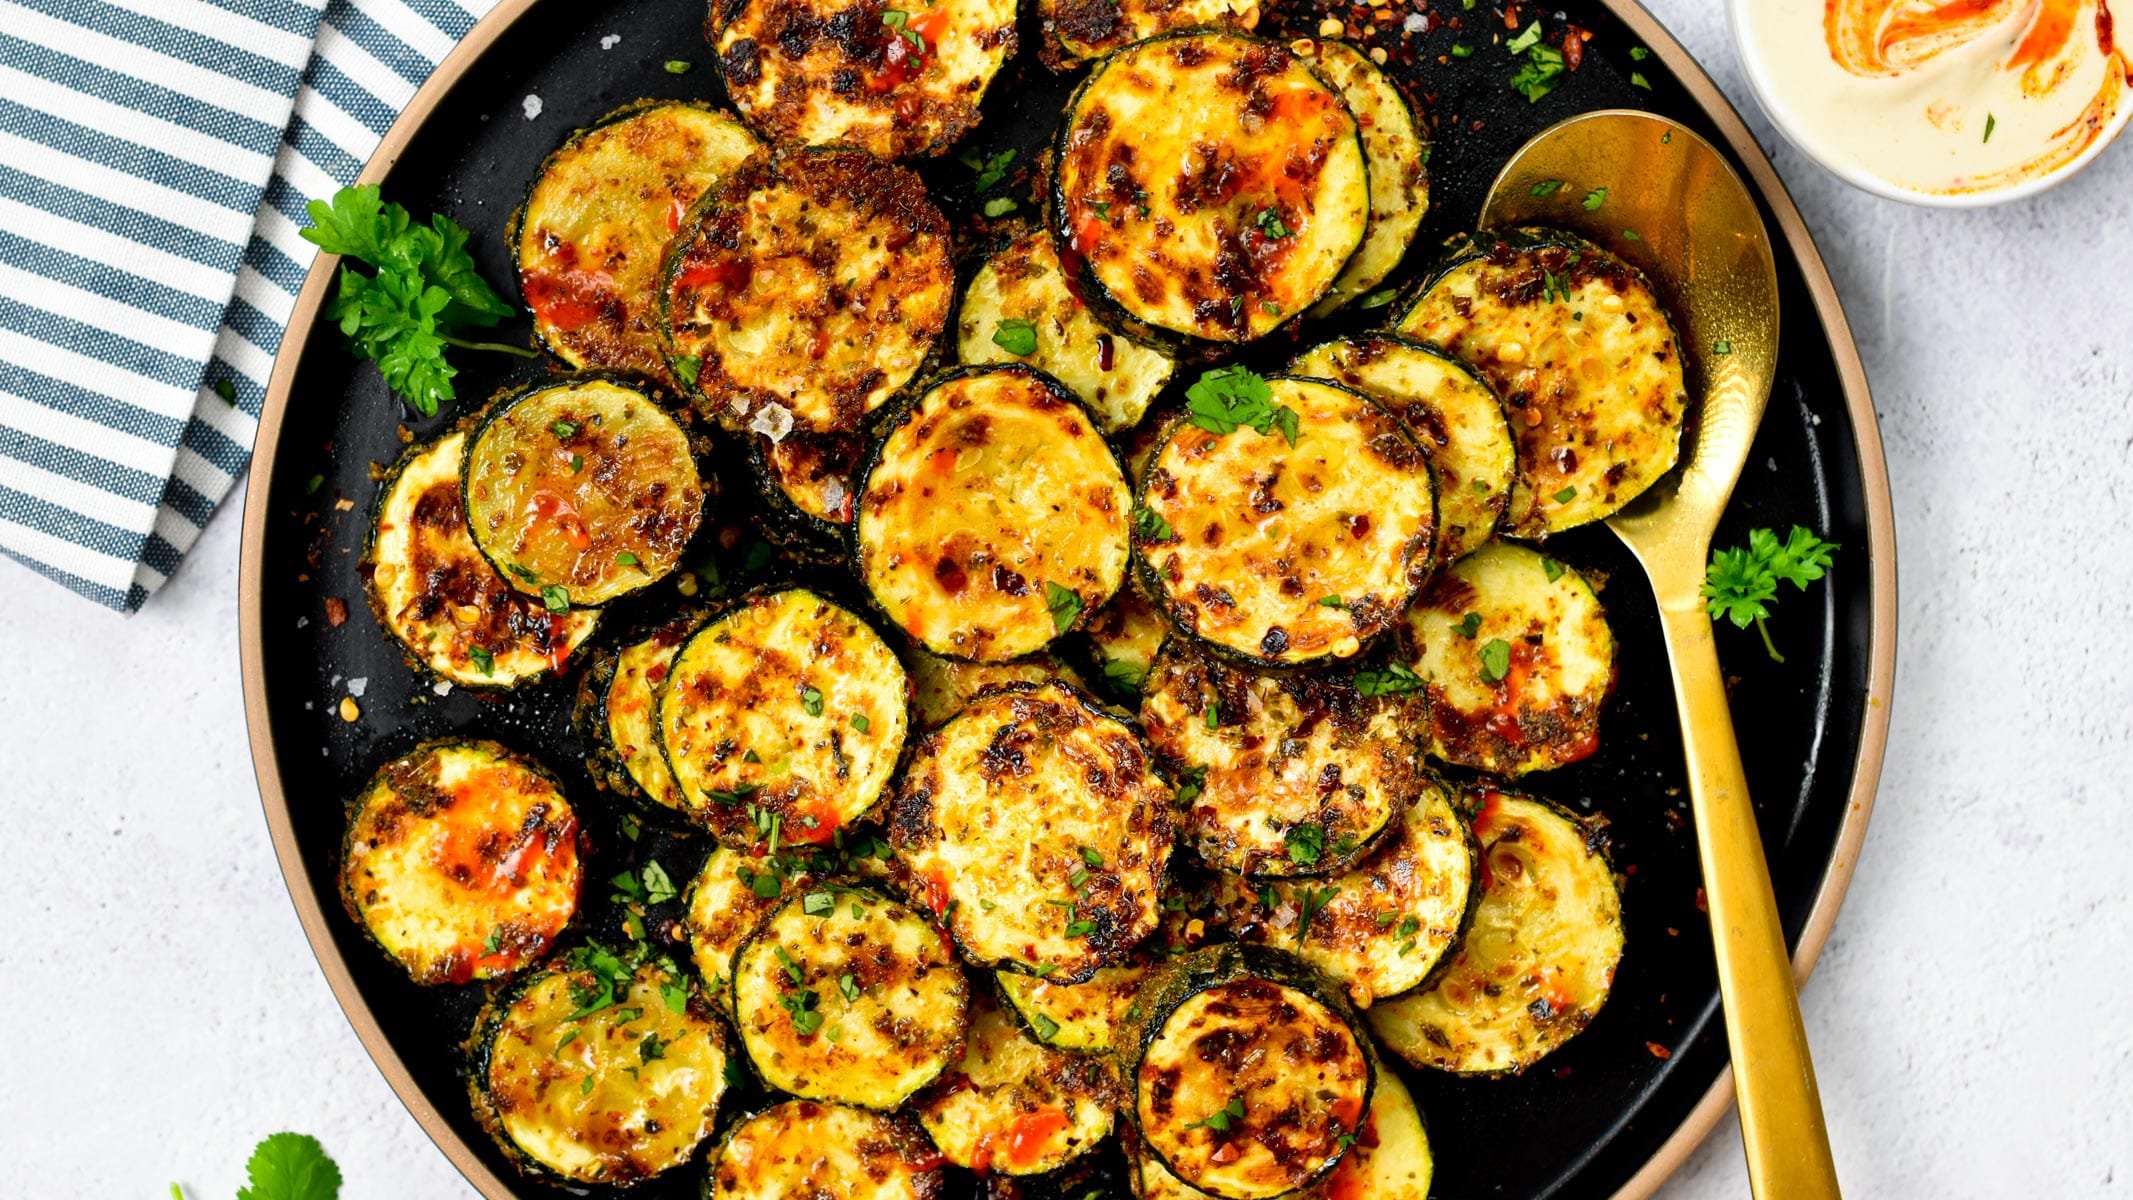 These Roasted Zucchini recipe is the most easy side dish recipe ever packed with summer flavors. Plus, it's low-carb, vegan and gluten-free so all the family can enjoy it.These Roasted Zucchini recipe is the most easy side dish recipe ever packed with summer flavors. Plus, it's low-carb, vegan and gluten-free so all the family can enjoy it.